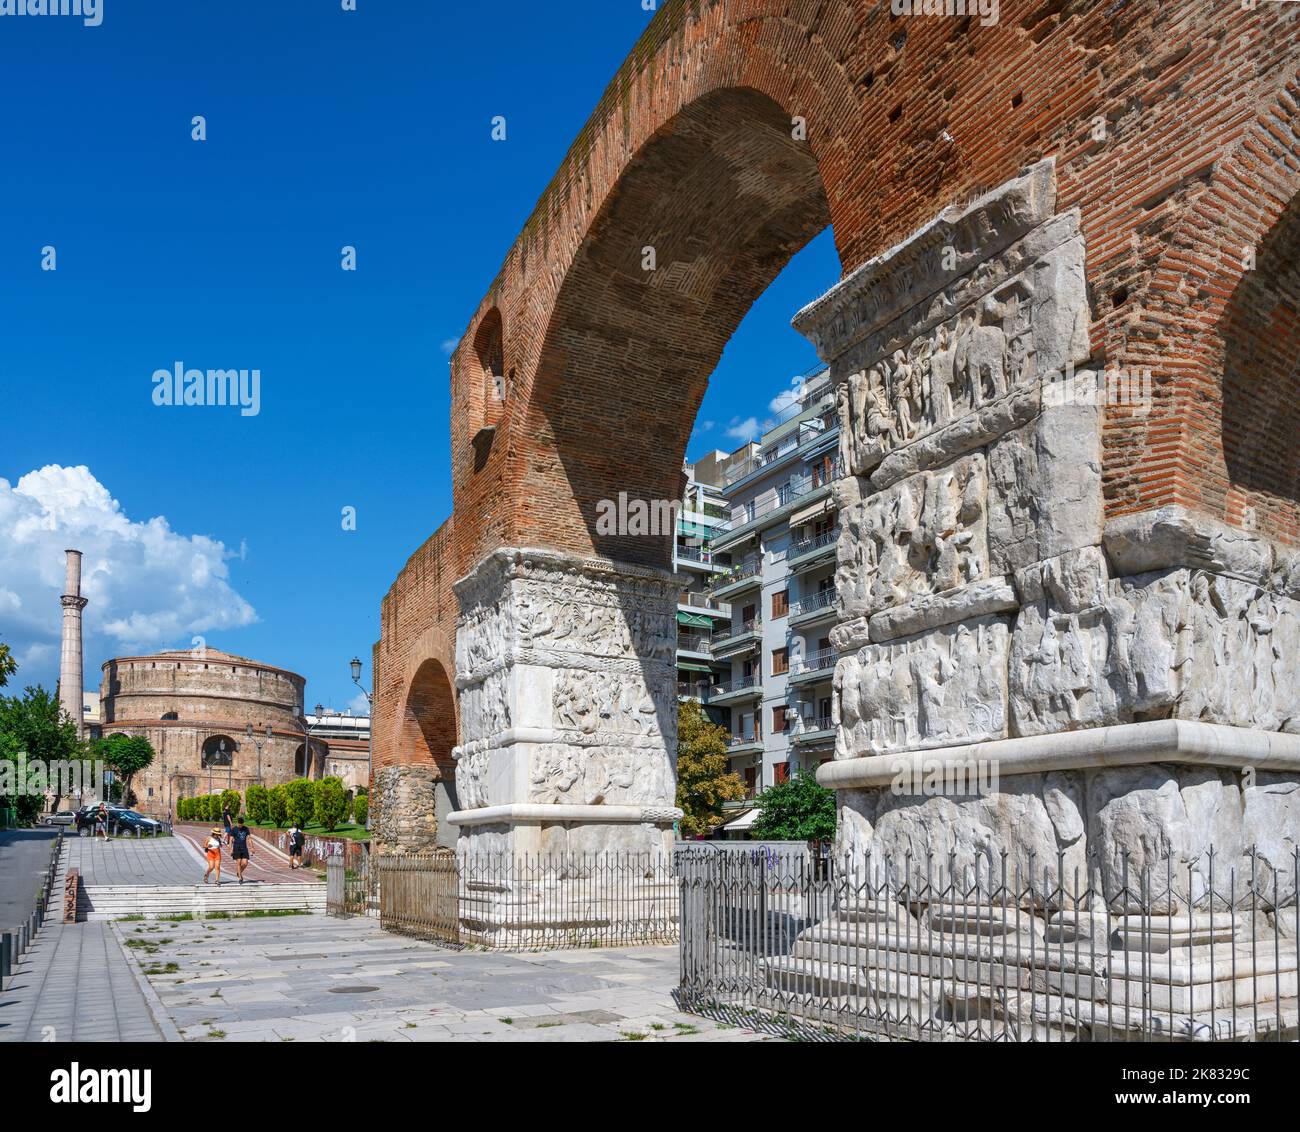 Thessaloniki. The Arch of Galerius and the Rotunda of Galerius, Thessaloniki, Macedonia, Greece Stock Photo